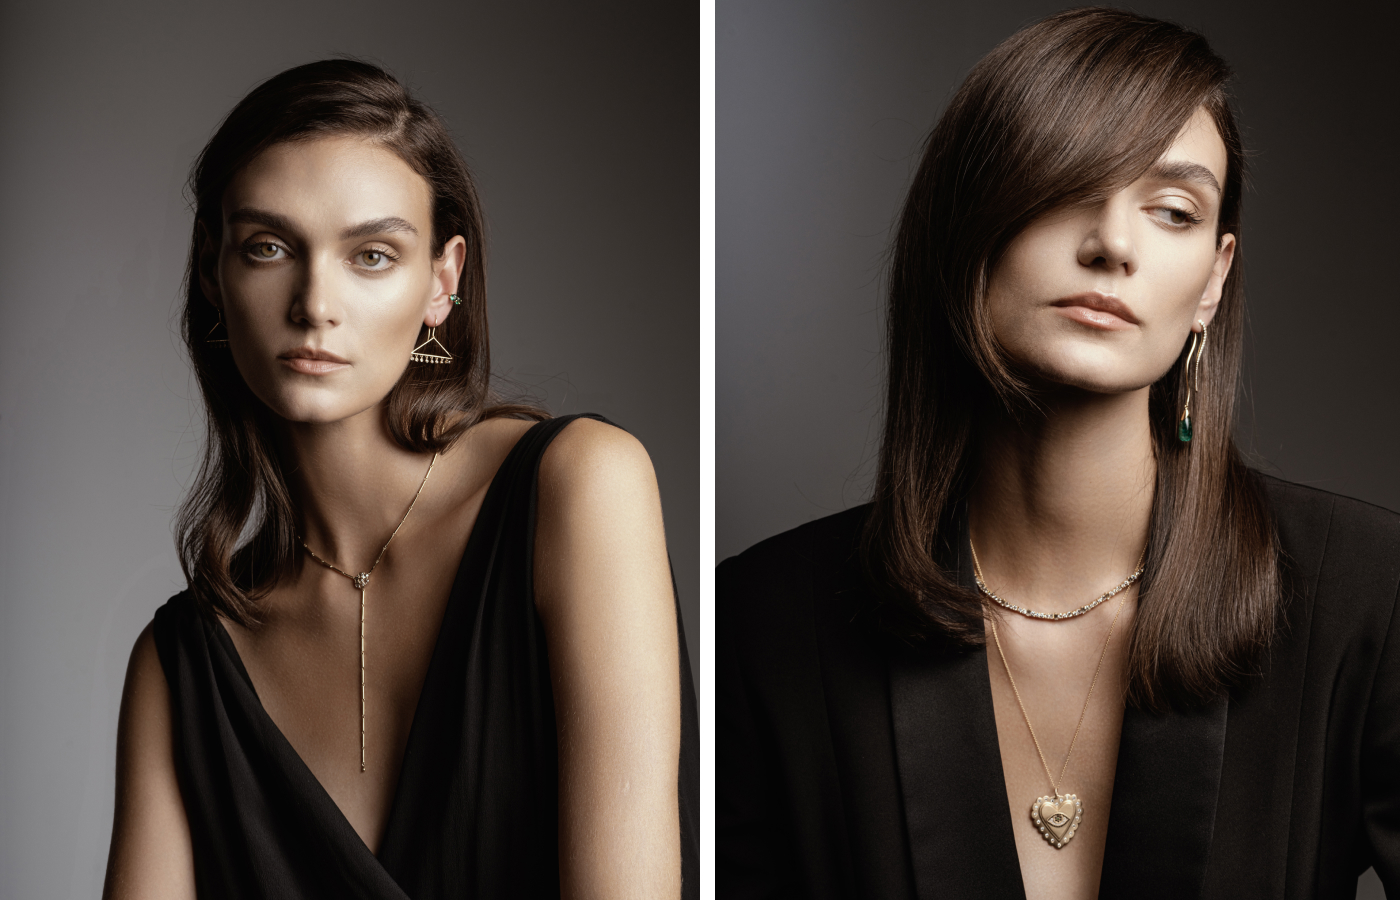 Models wear yellow gold jewellery designs by Ileana Makri, including the Protection Heart pendant (right)